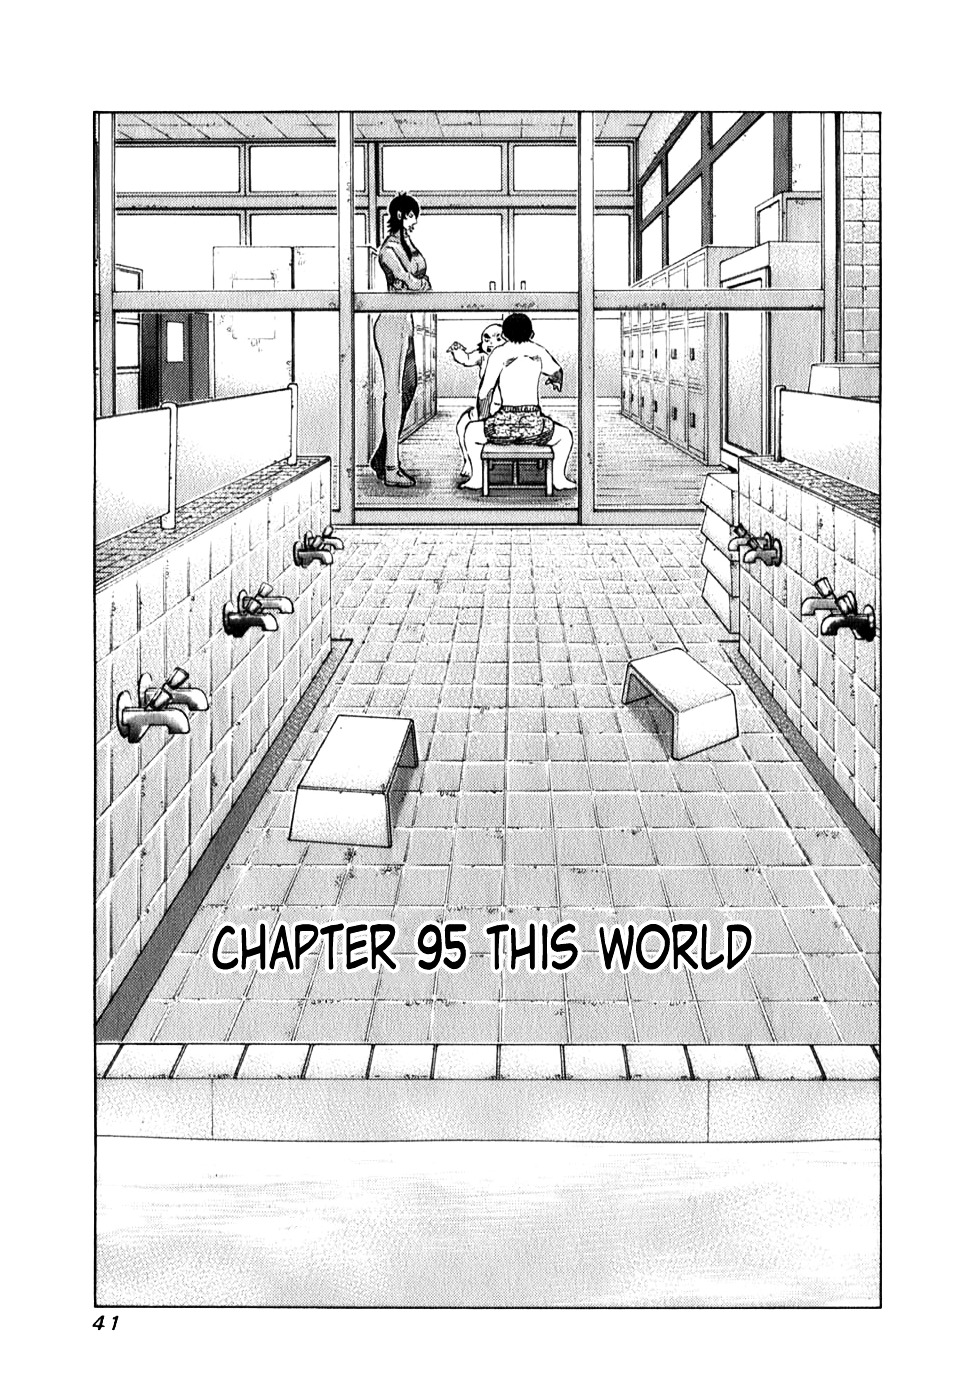 81 Diver Chapter 95 #1